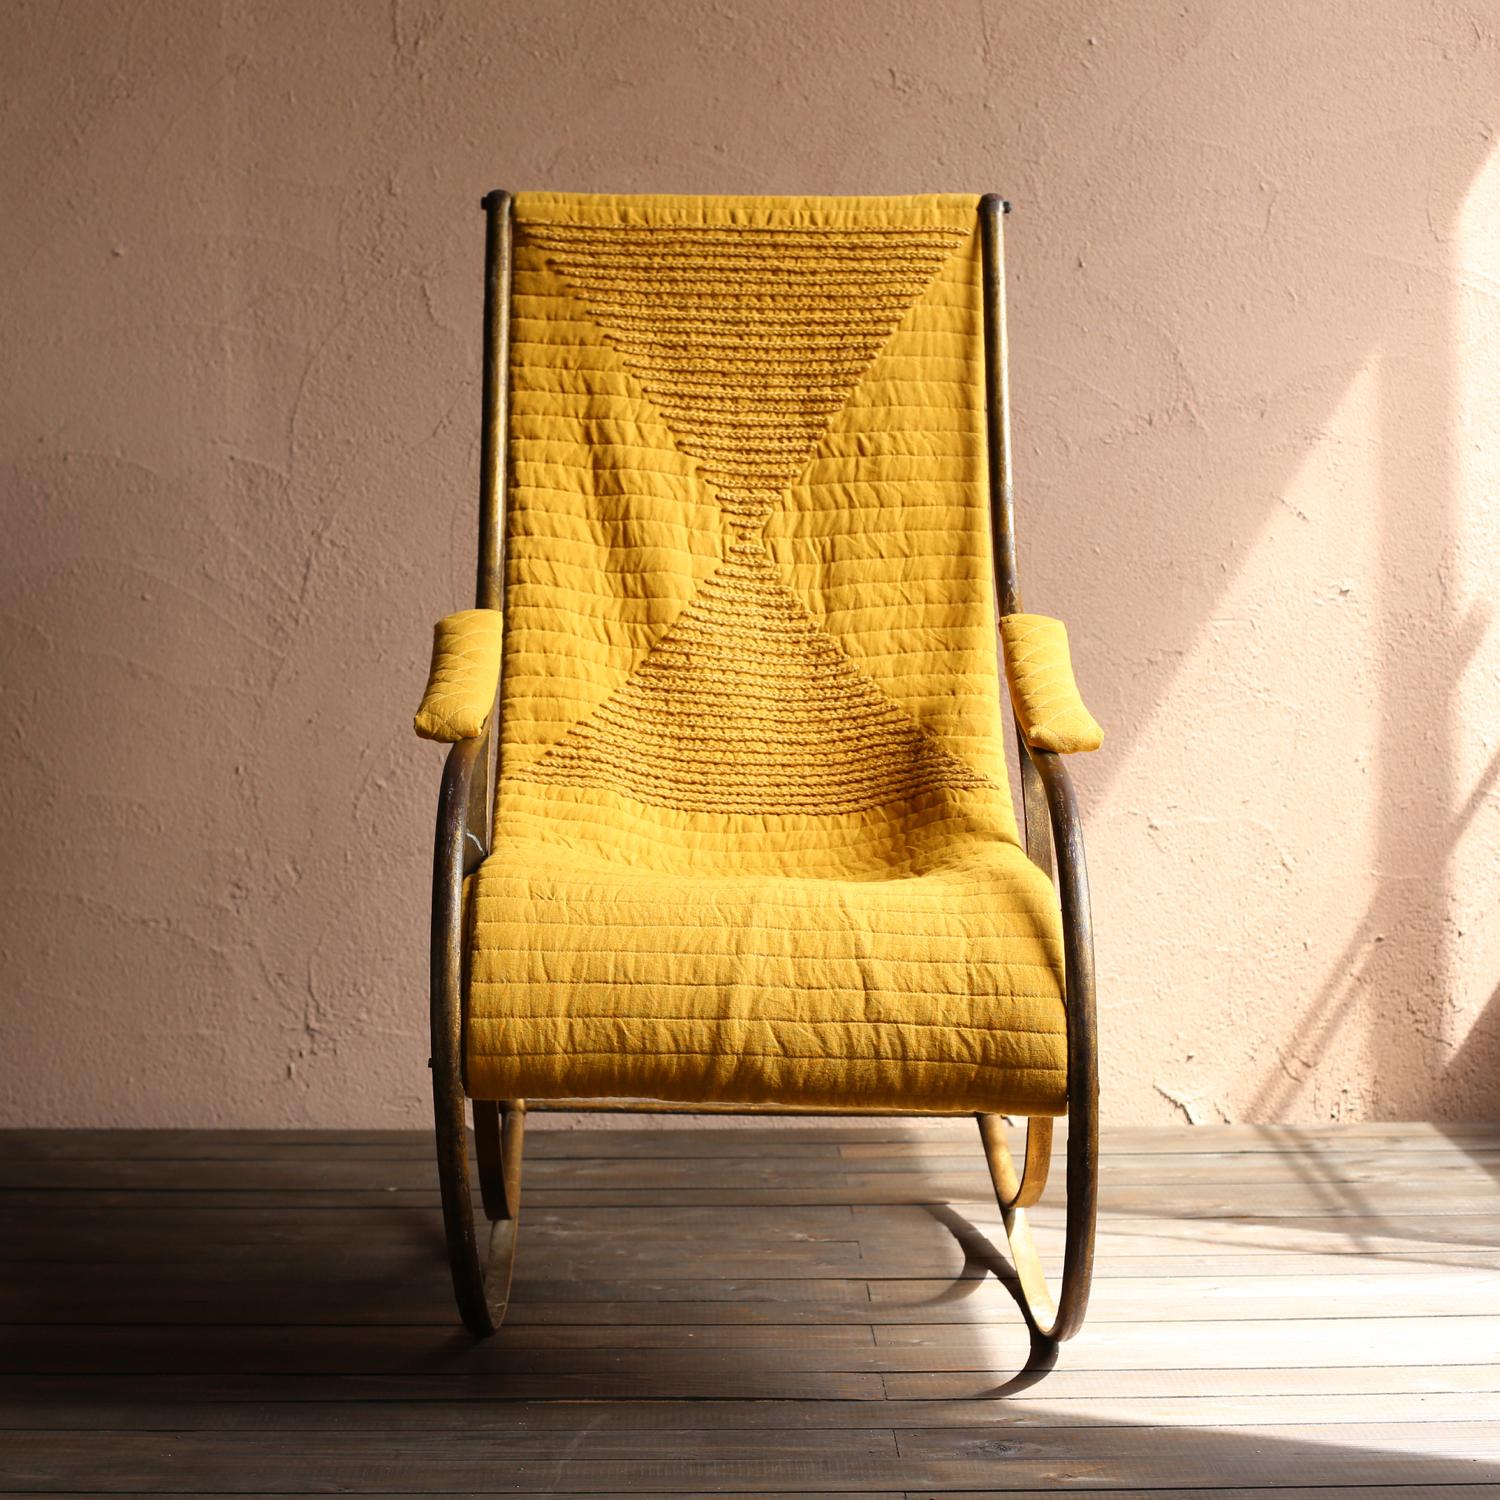 Antique brass rocking chair from Sweden.
The seat was made by the Japanese contemporary design unit 